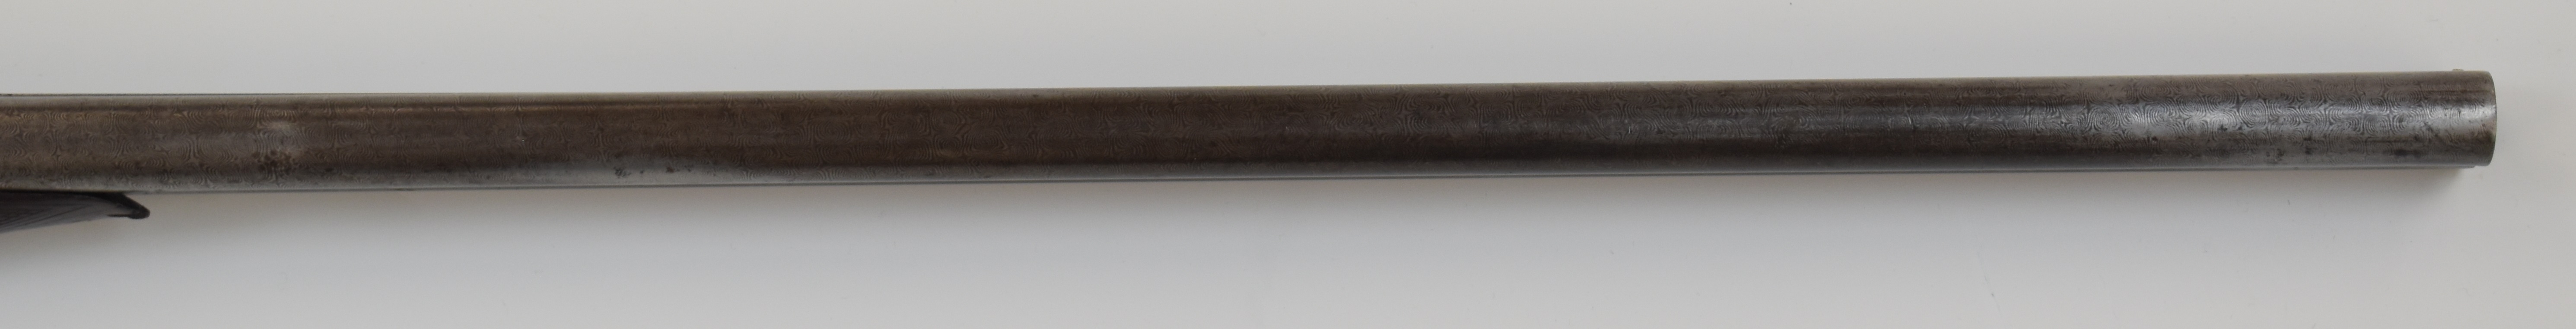 George Edward Lewis 12 bore side by side hammer action shotgun with named and engraved locks, - Image 5 of 13